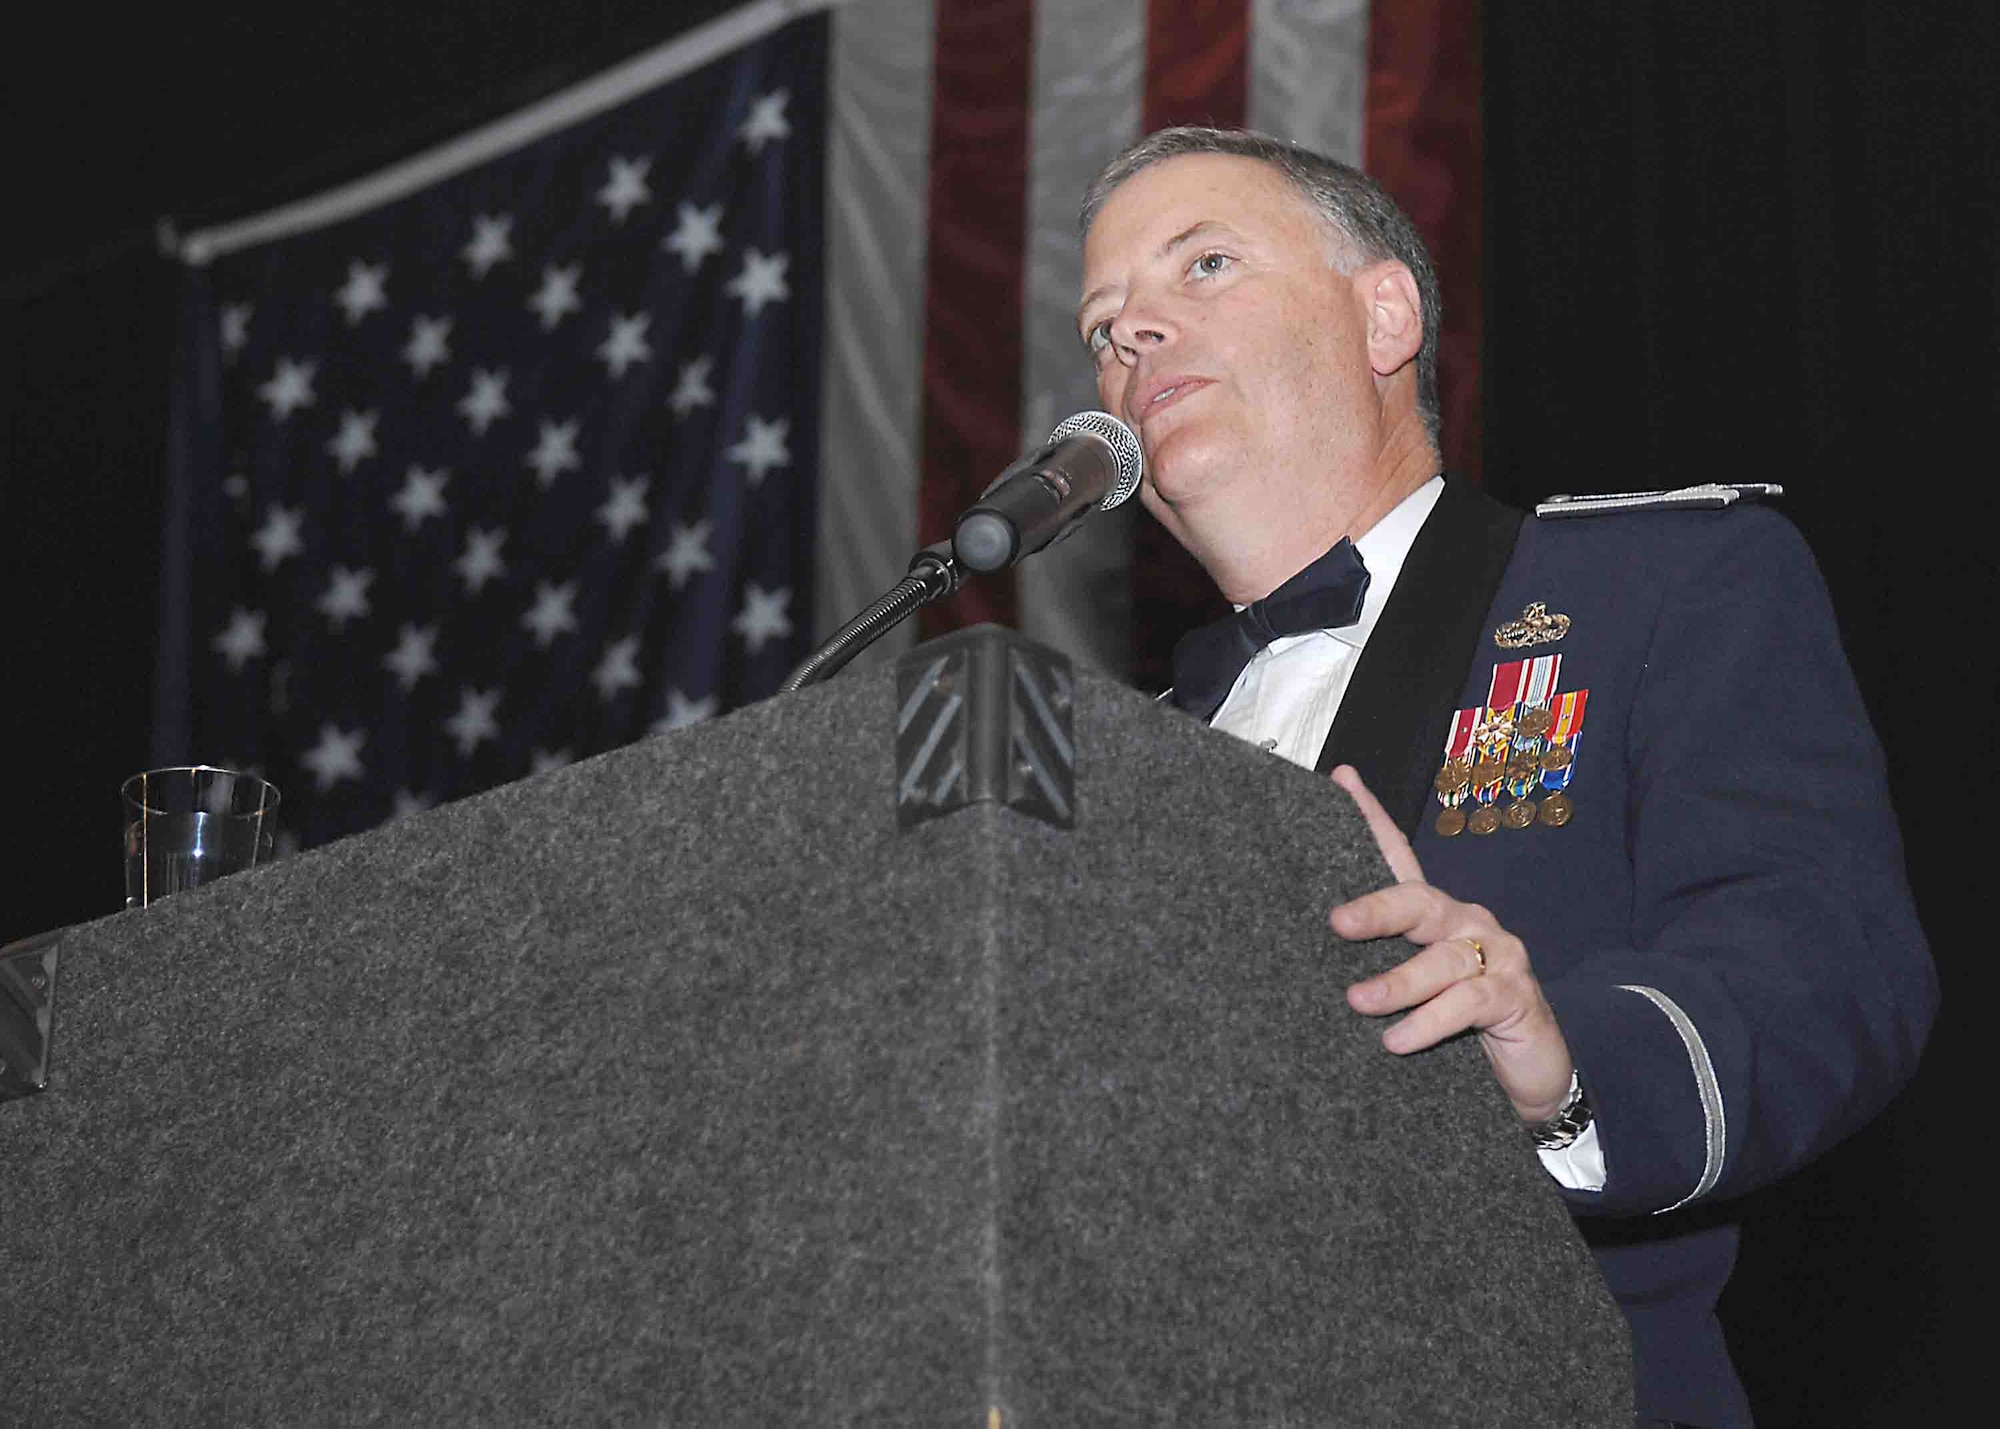 SUMTER, S.C. -- Col. Michael Vidal, 20th Maintenance Group commander, greets  Airmen during the Maintenance Professional of the Year Banquet, April 13 at the Sumter Exhibition Center. The Professional of the Year banquet is held to highlight the contributions of all 20th MXG members and to recognize the most outstanding Airmen within the group. (U.S. Air Force photo/Staff Sgt. Nathan Bevier)